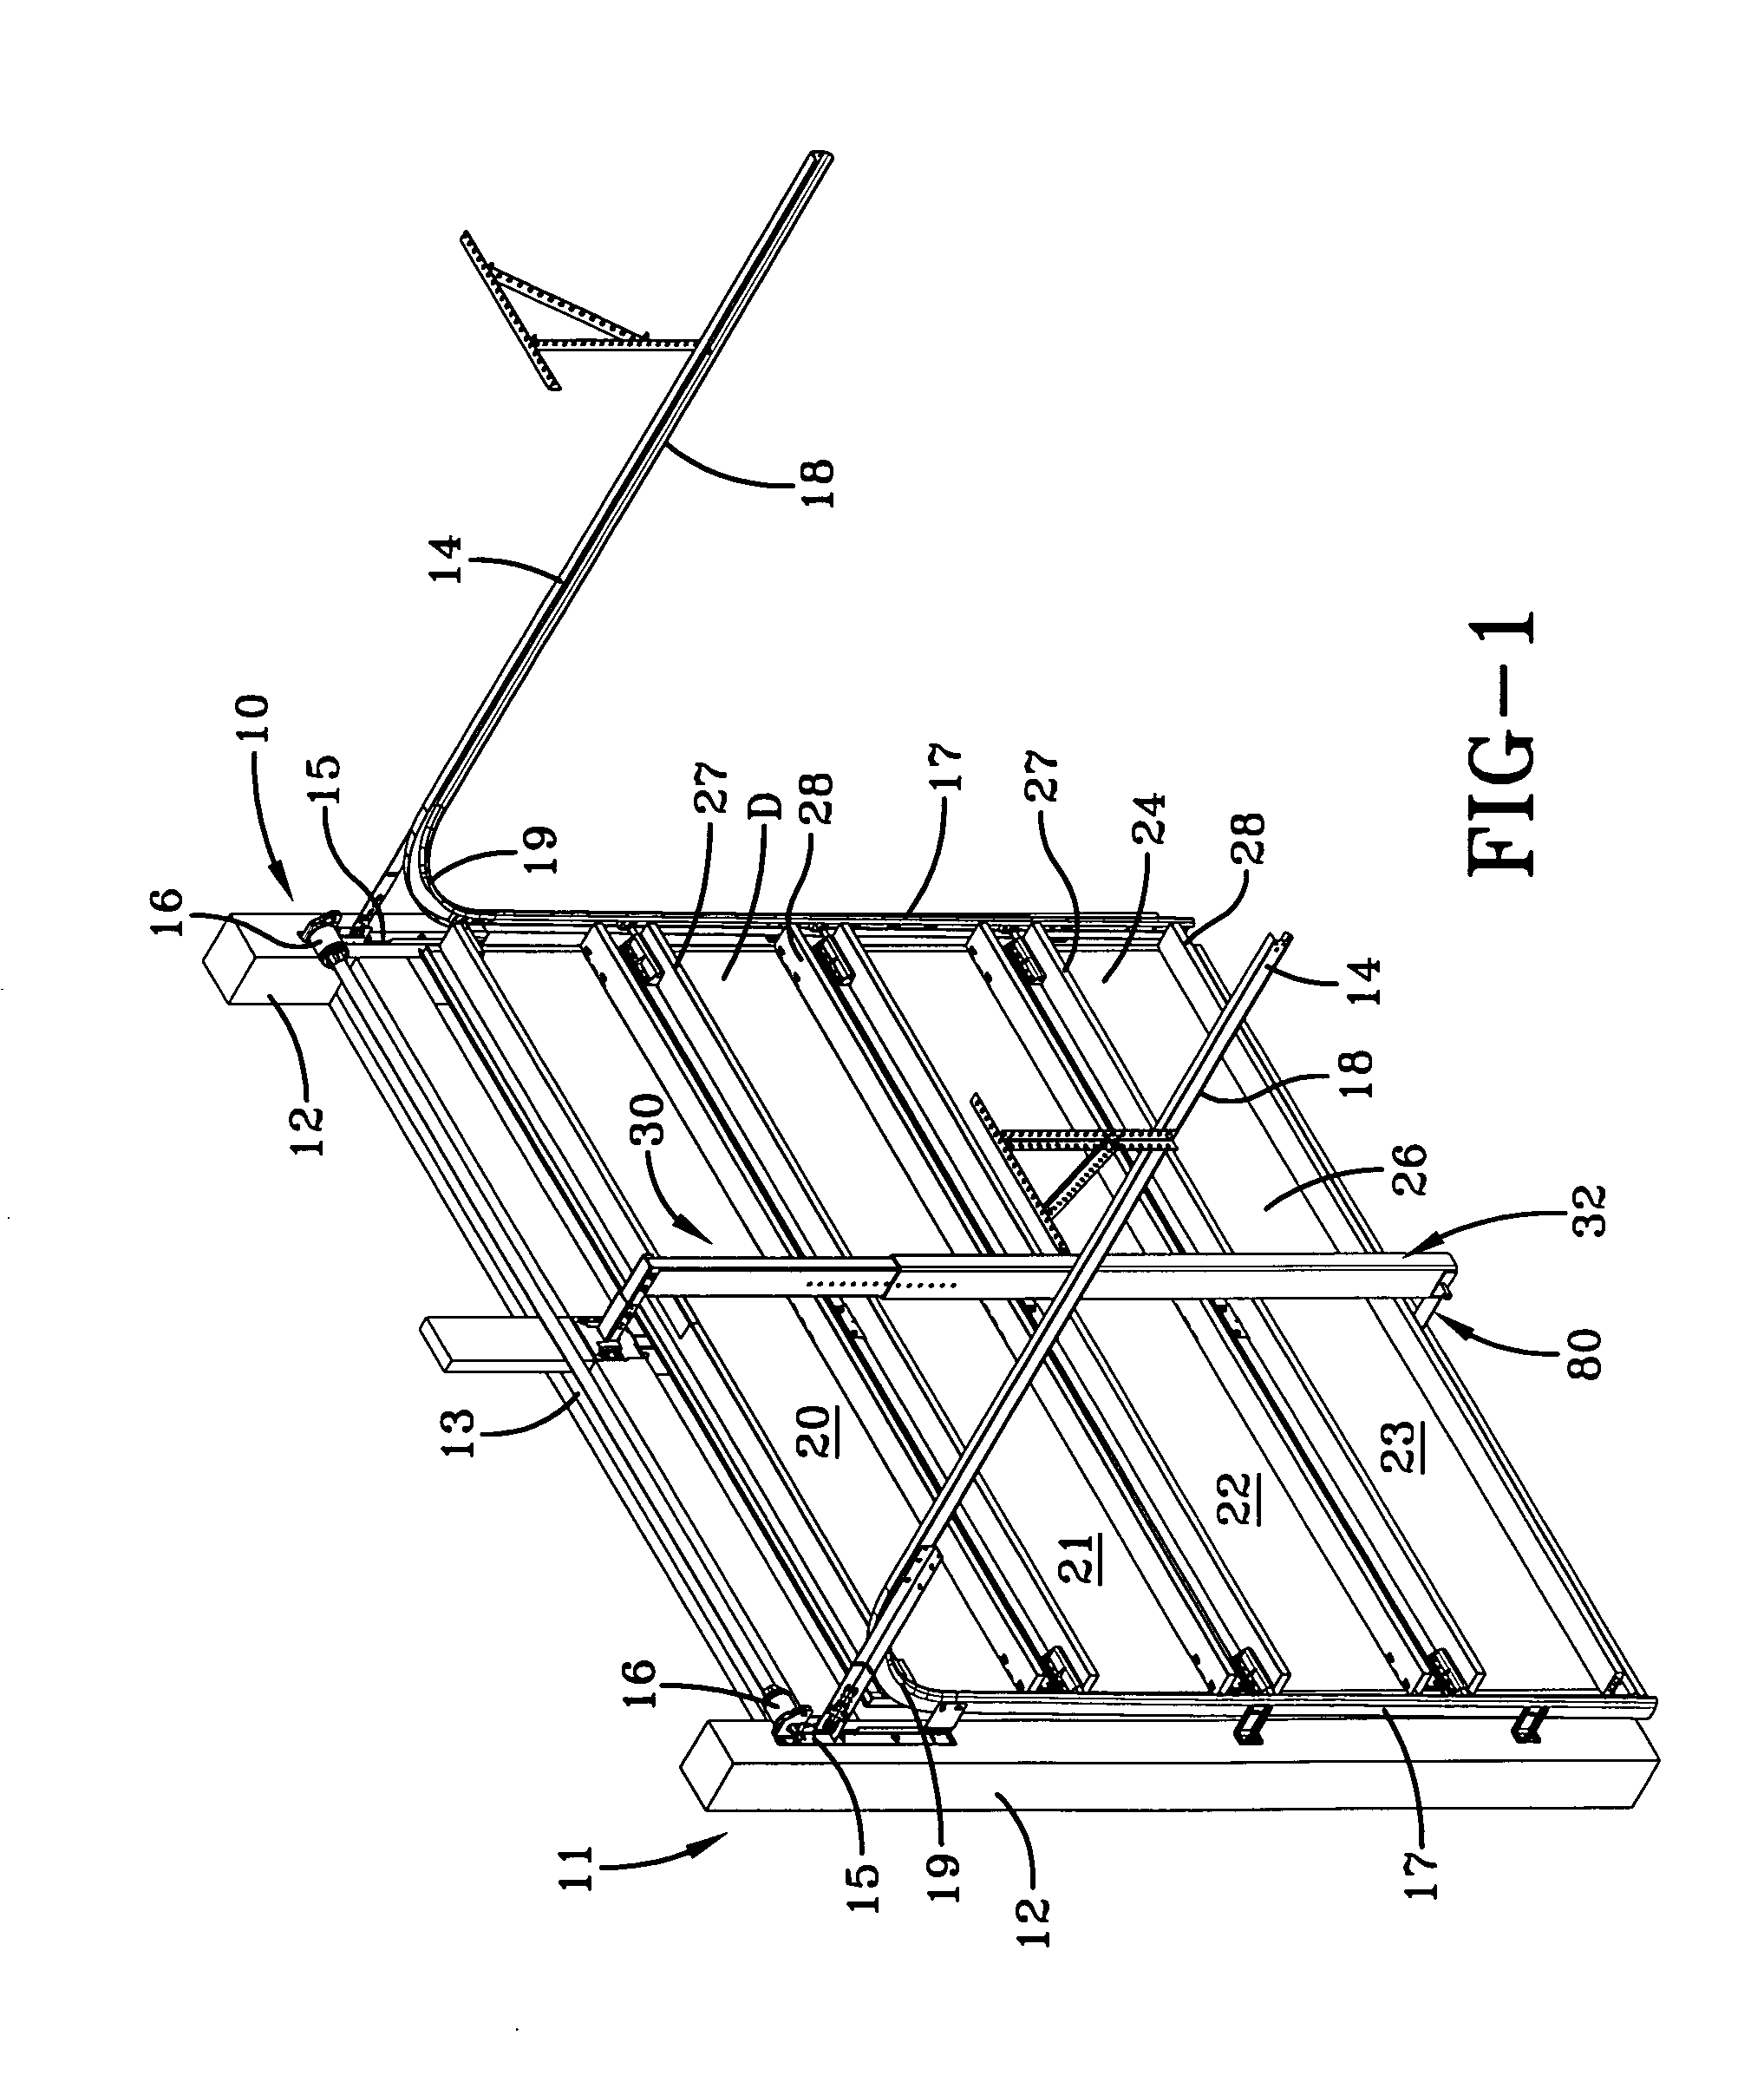 Barrier with dual post wind resistance system